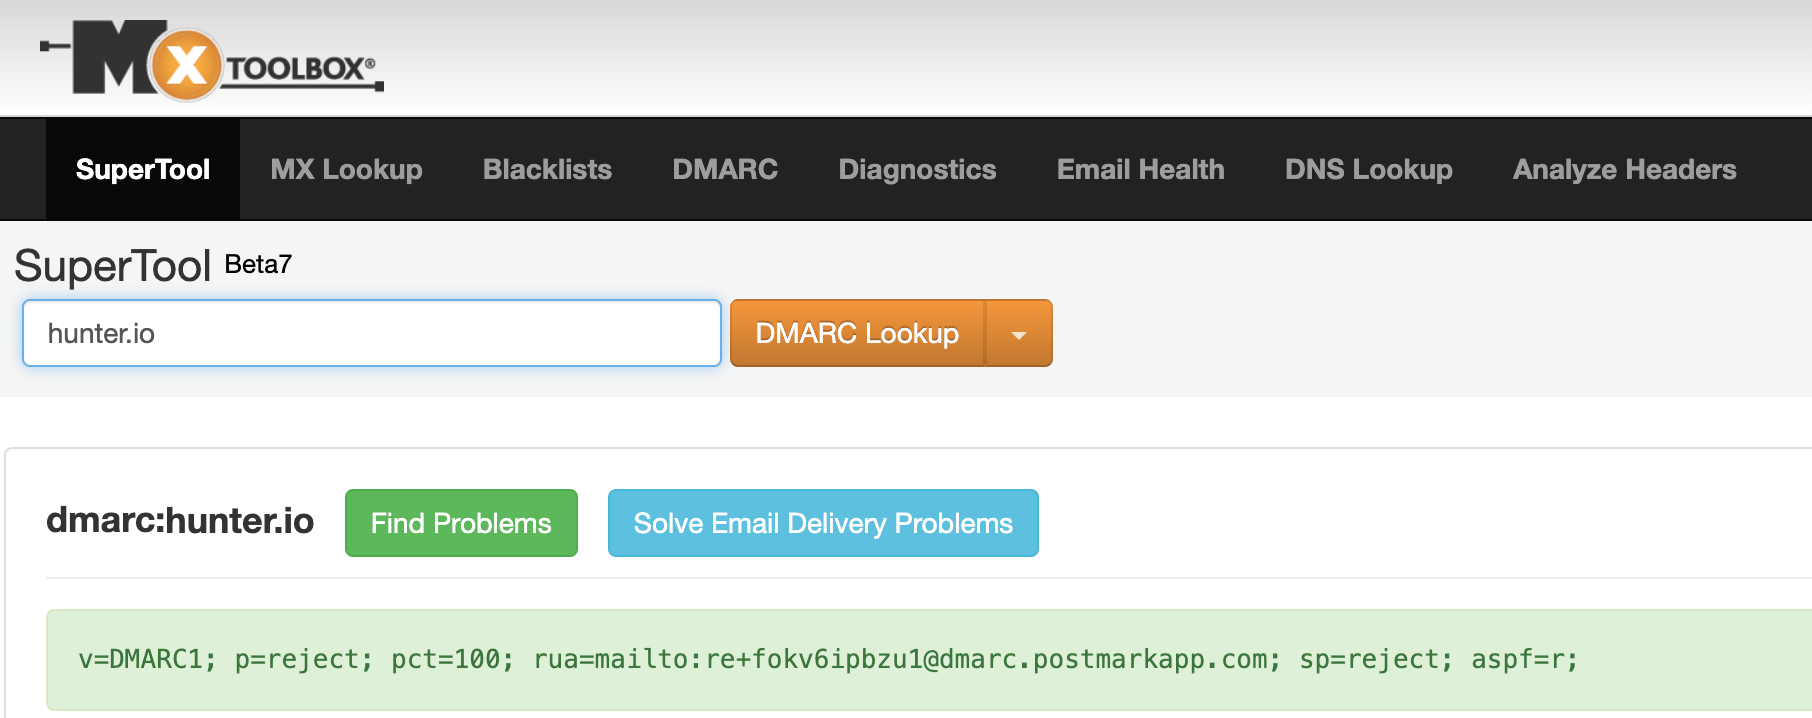 MXtoolbox report for a DMARC record of hunter.io